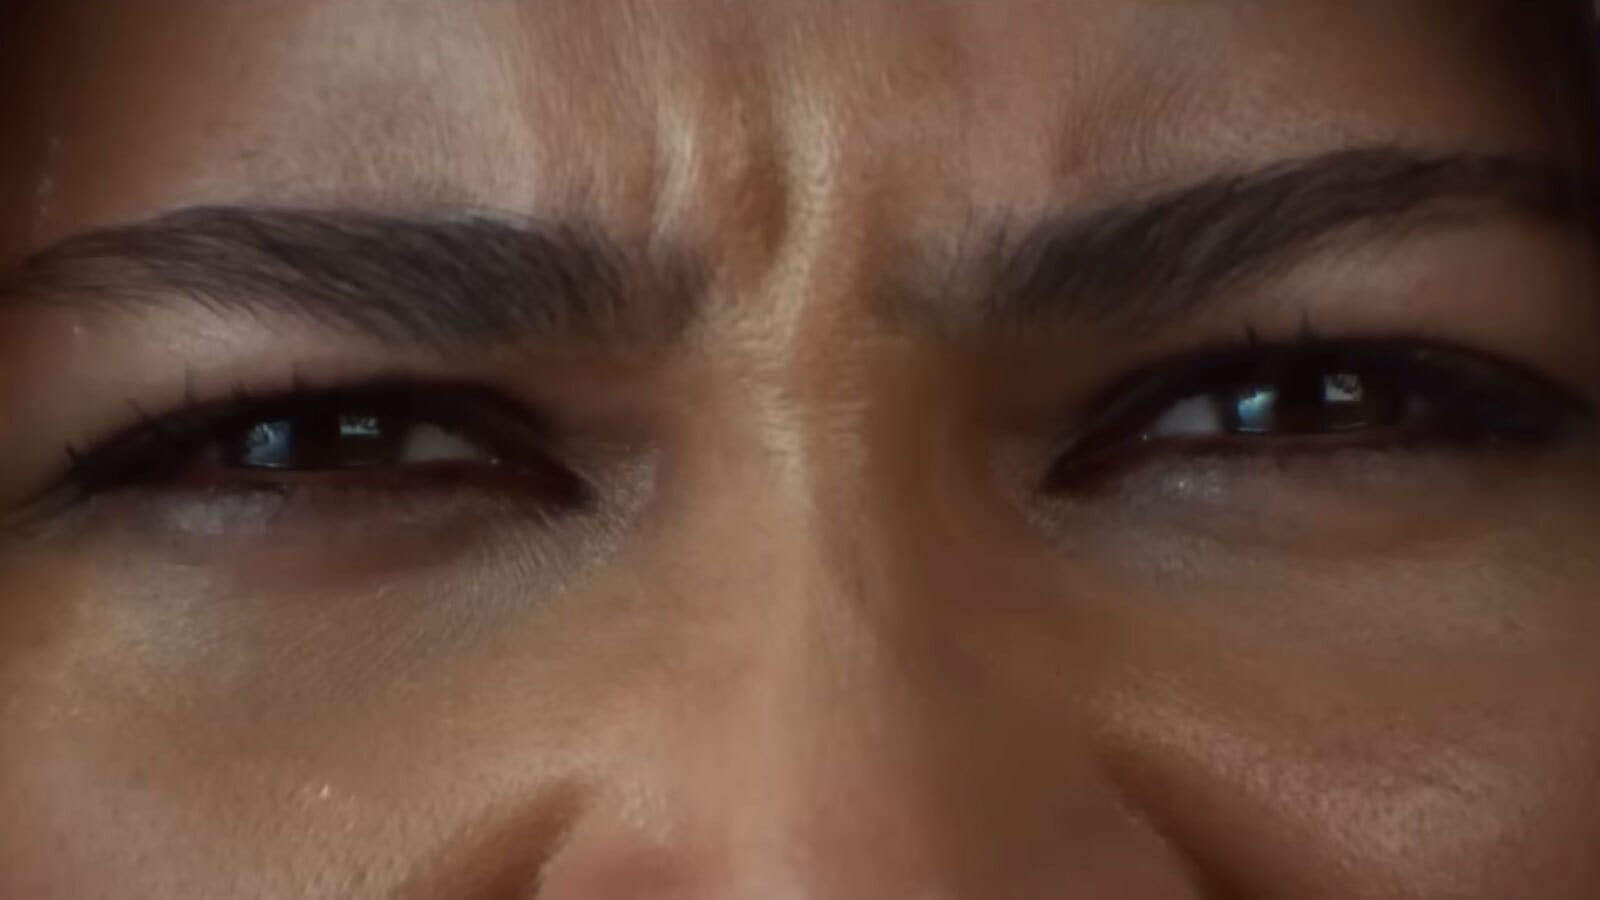 close up on zendaya’s fierce eyes, which are squinted in concentration. Her eyebrows are furrowed. 